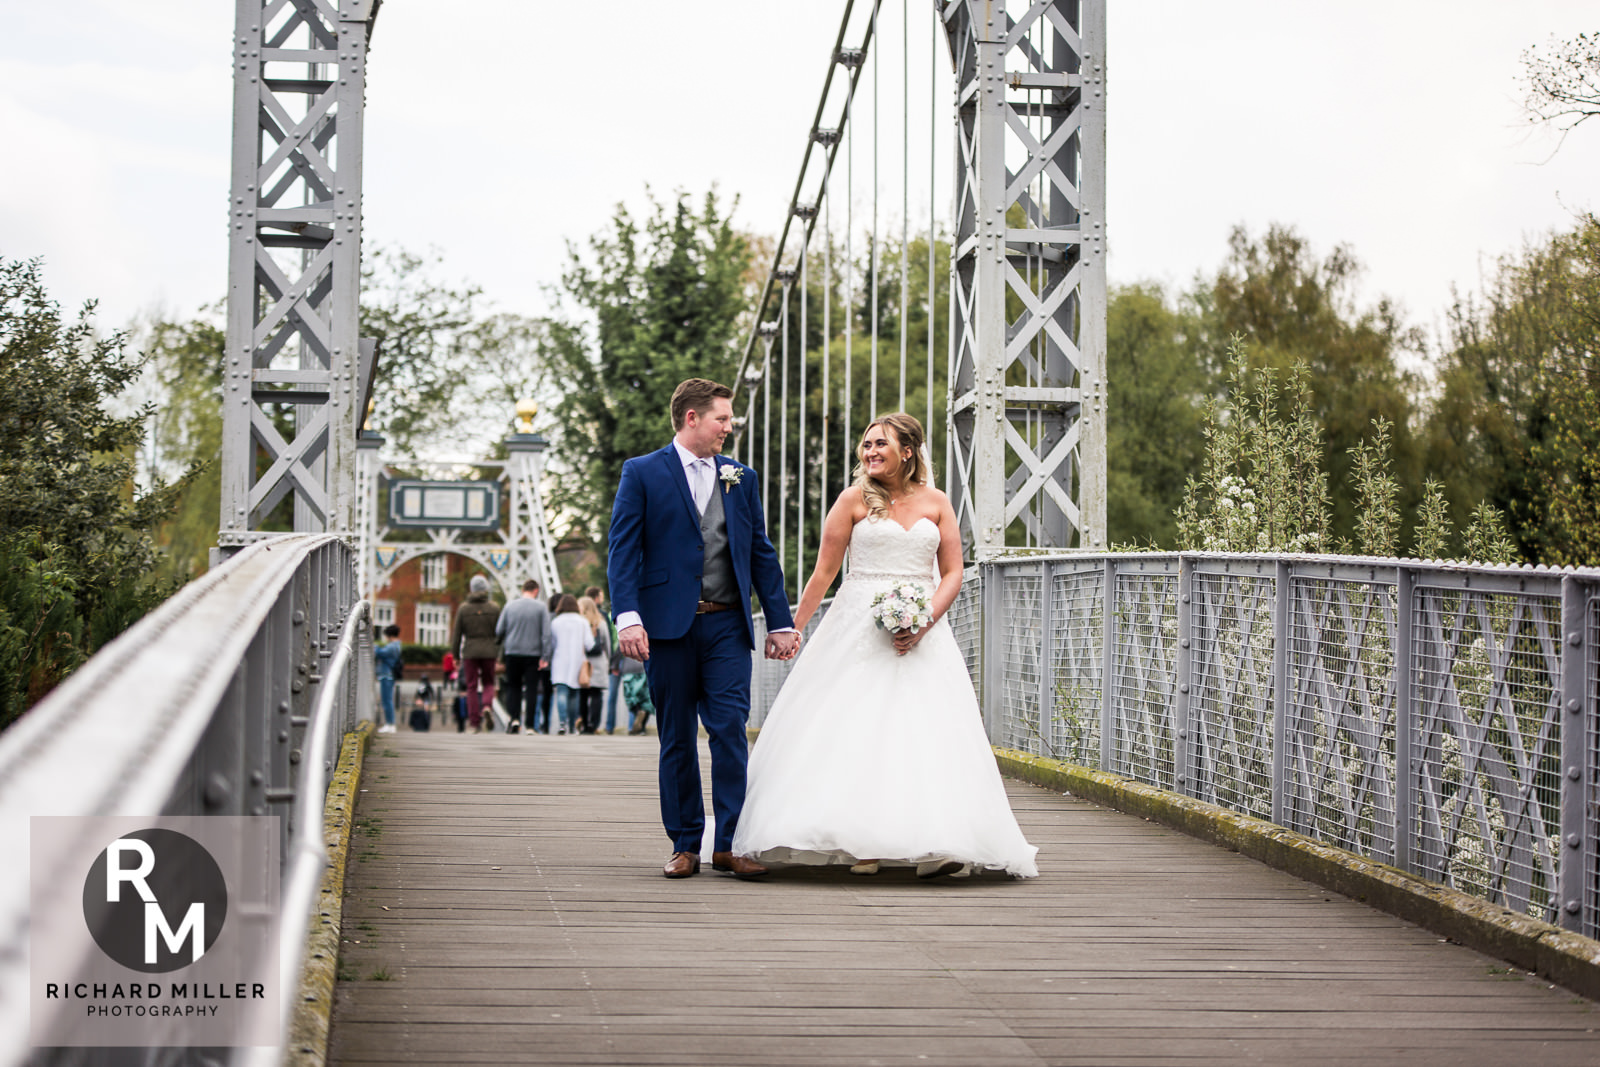 Dale Natalie Web 492 - An Awesome Chester Wedding at Oddfellows